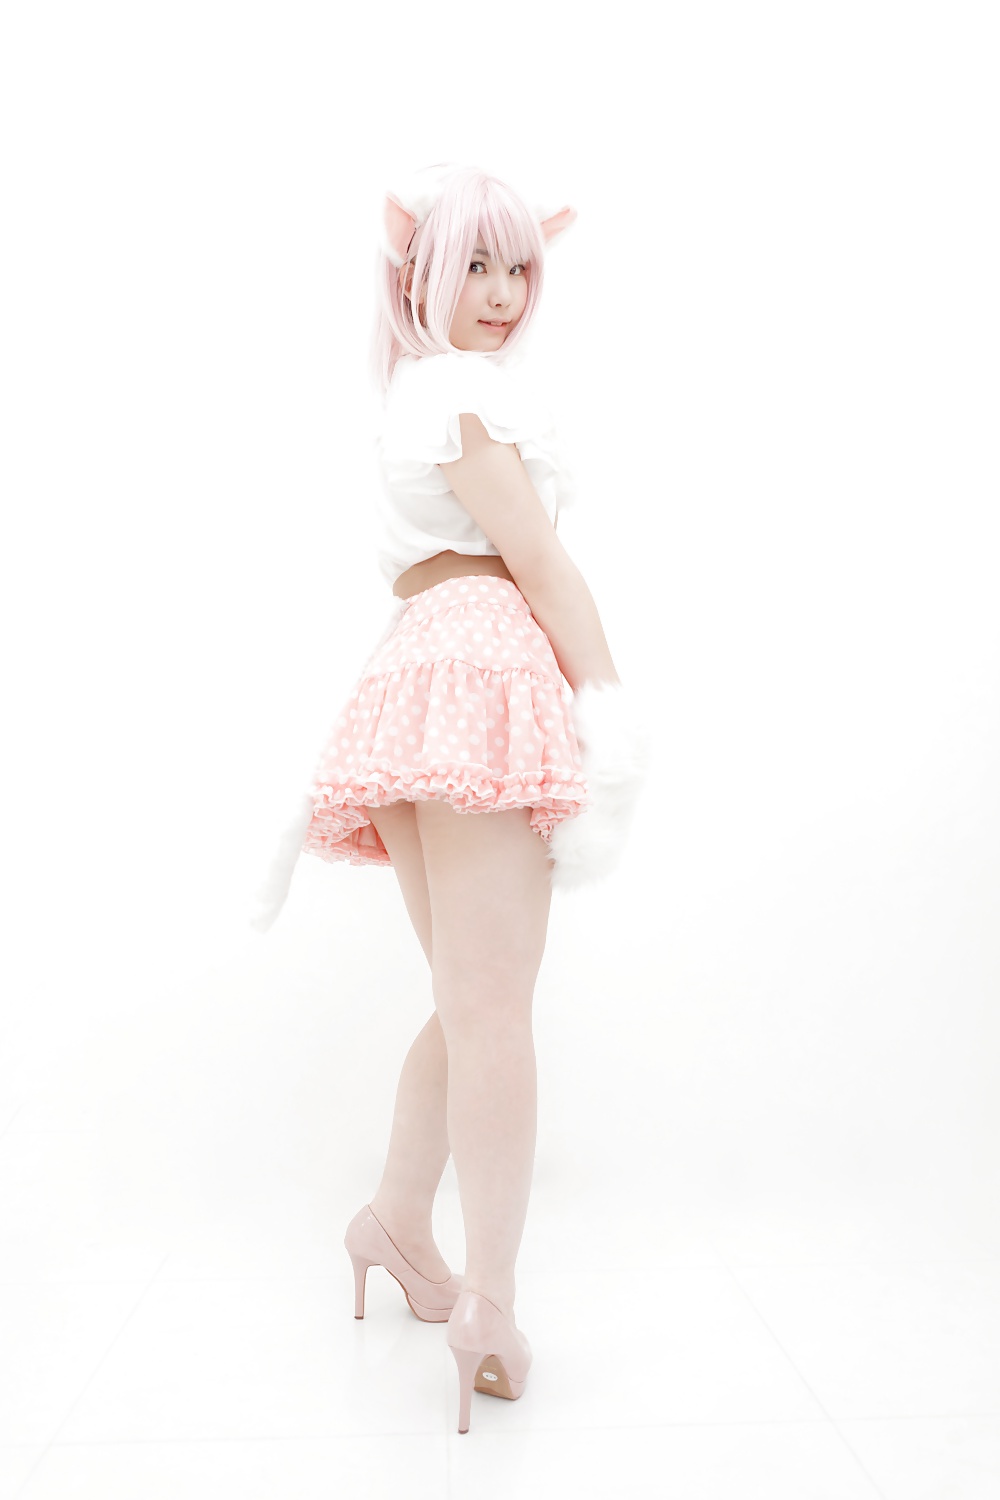 Asiatica cosplay in bianco
 #26558607